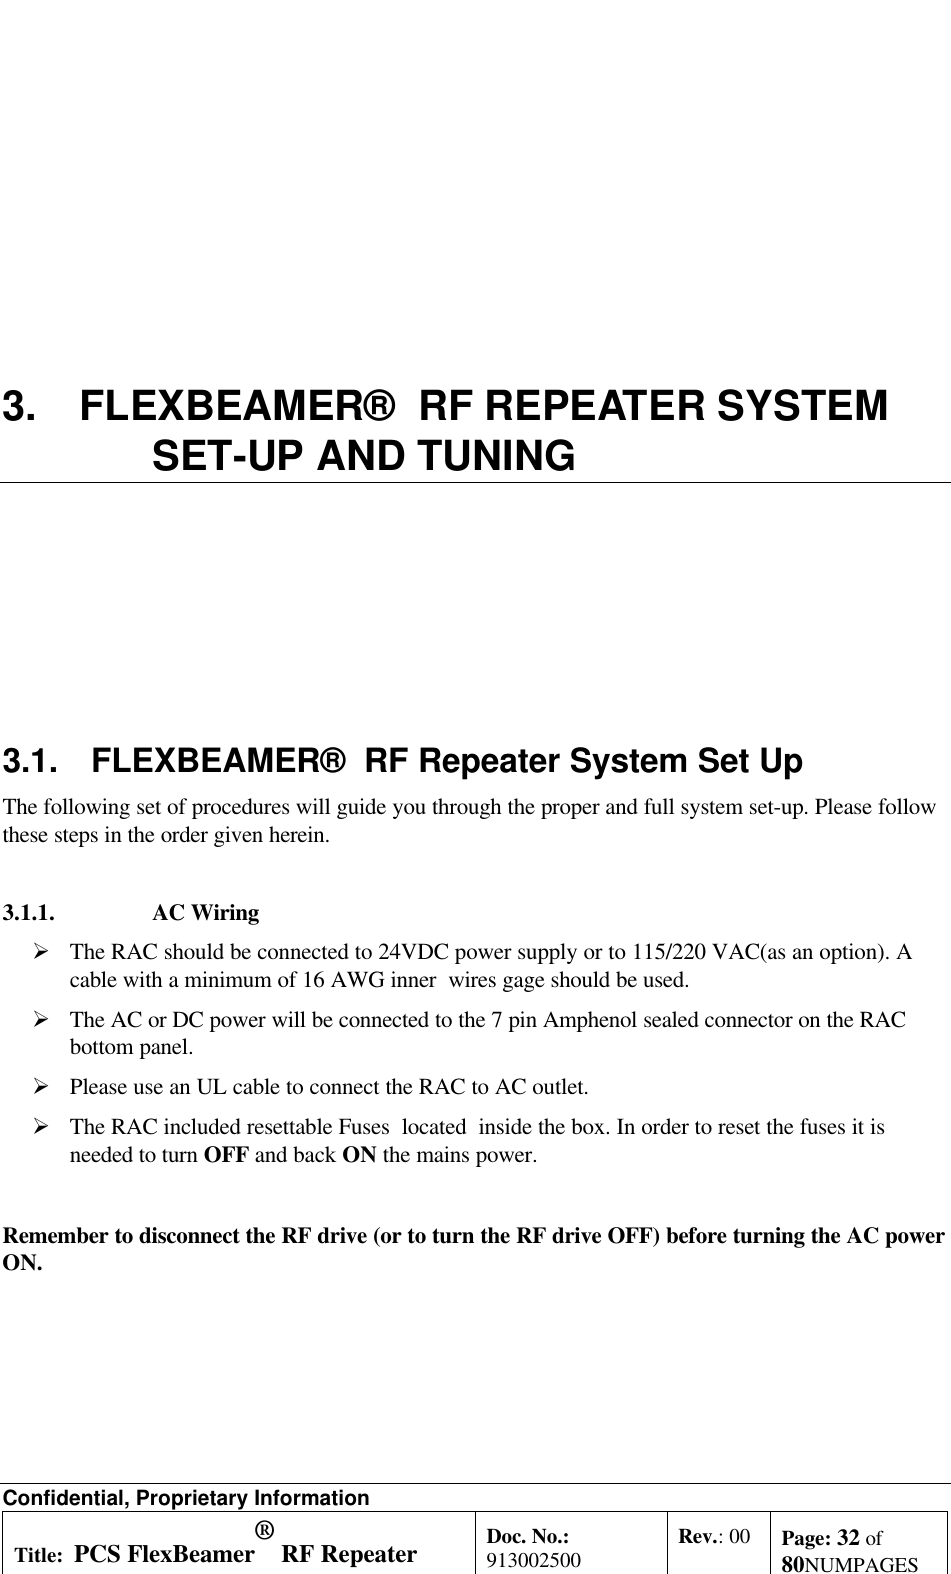 Confidential, Proprietary InformationTitle: PCS FlexBeamer® RF RepeaterSystem A &amp;O ManualDoc. No.:913002500 Rev.: 00 Page: 32 of80NUMPAGES3. FLEXBEAMER®  RF REPEATER SYSTEMSET-UP AND TUNING3.1. FLEXBEAMER®  RF Repeater System Set UpThe following set of procedures will guide you through the proper and full system set-up. Please followthese steps in the order given herein.3.1.1.  AC WiringØ The RAC should be connected to 24VDC power supply or to 115/220 VAC(as an option). Acable with a minimum of 16 AWG inner  wires gage should be used.Ø The AC or DC power will be connected to the 7 pin Amphenol sealed connector on the RACbottom panel.Ø Please use an UL cable to connect the RAC to AC outlet.Ø The RAC included resettable Fuses  located  inside the box. In order to reset the fuses it isneeded to turn OFF and back ON the mains power.Remember to disconnect the RF drive (or to turn the RF drive OFF) before turning the AC powerON.